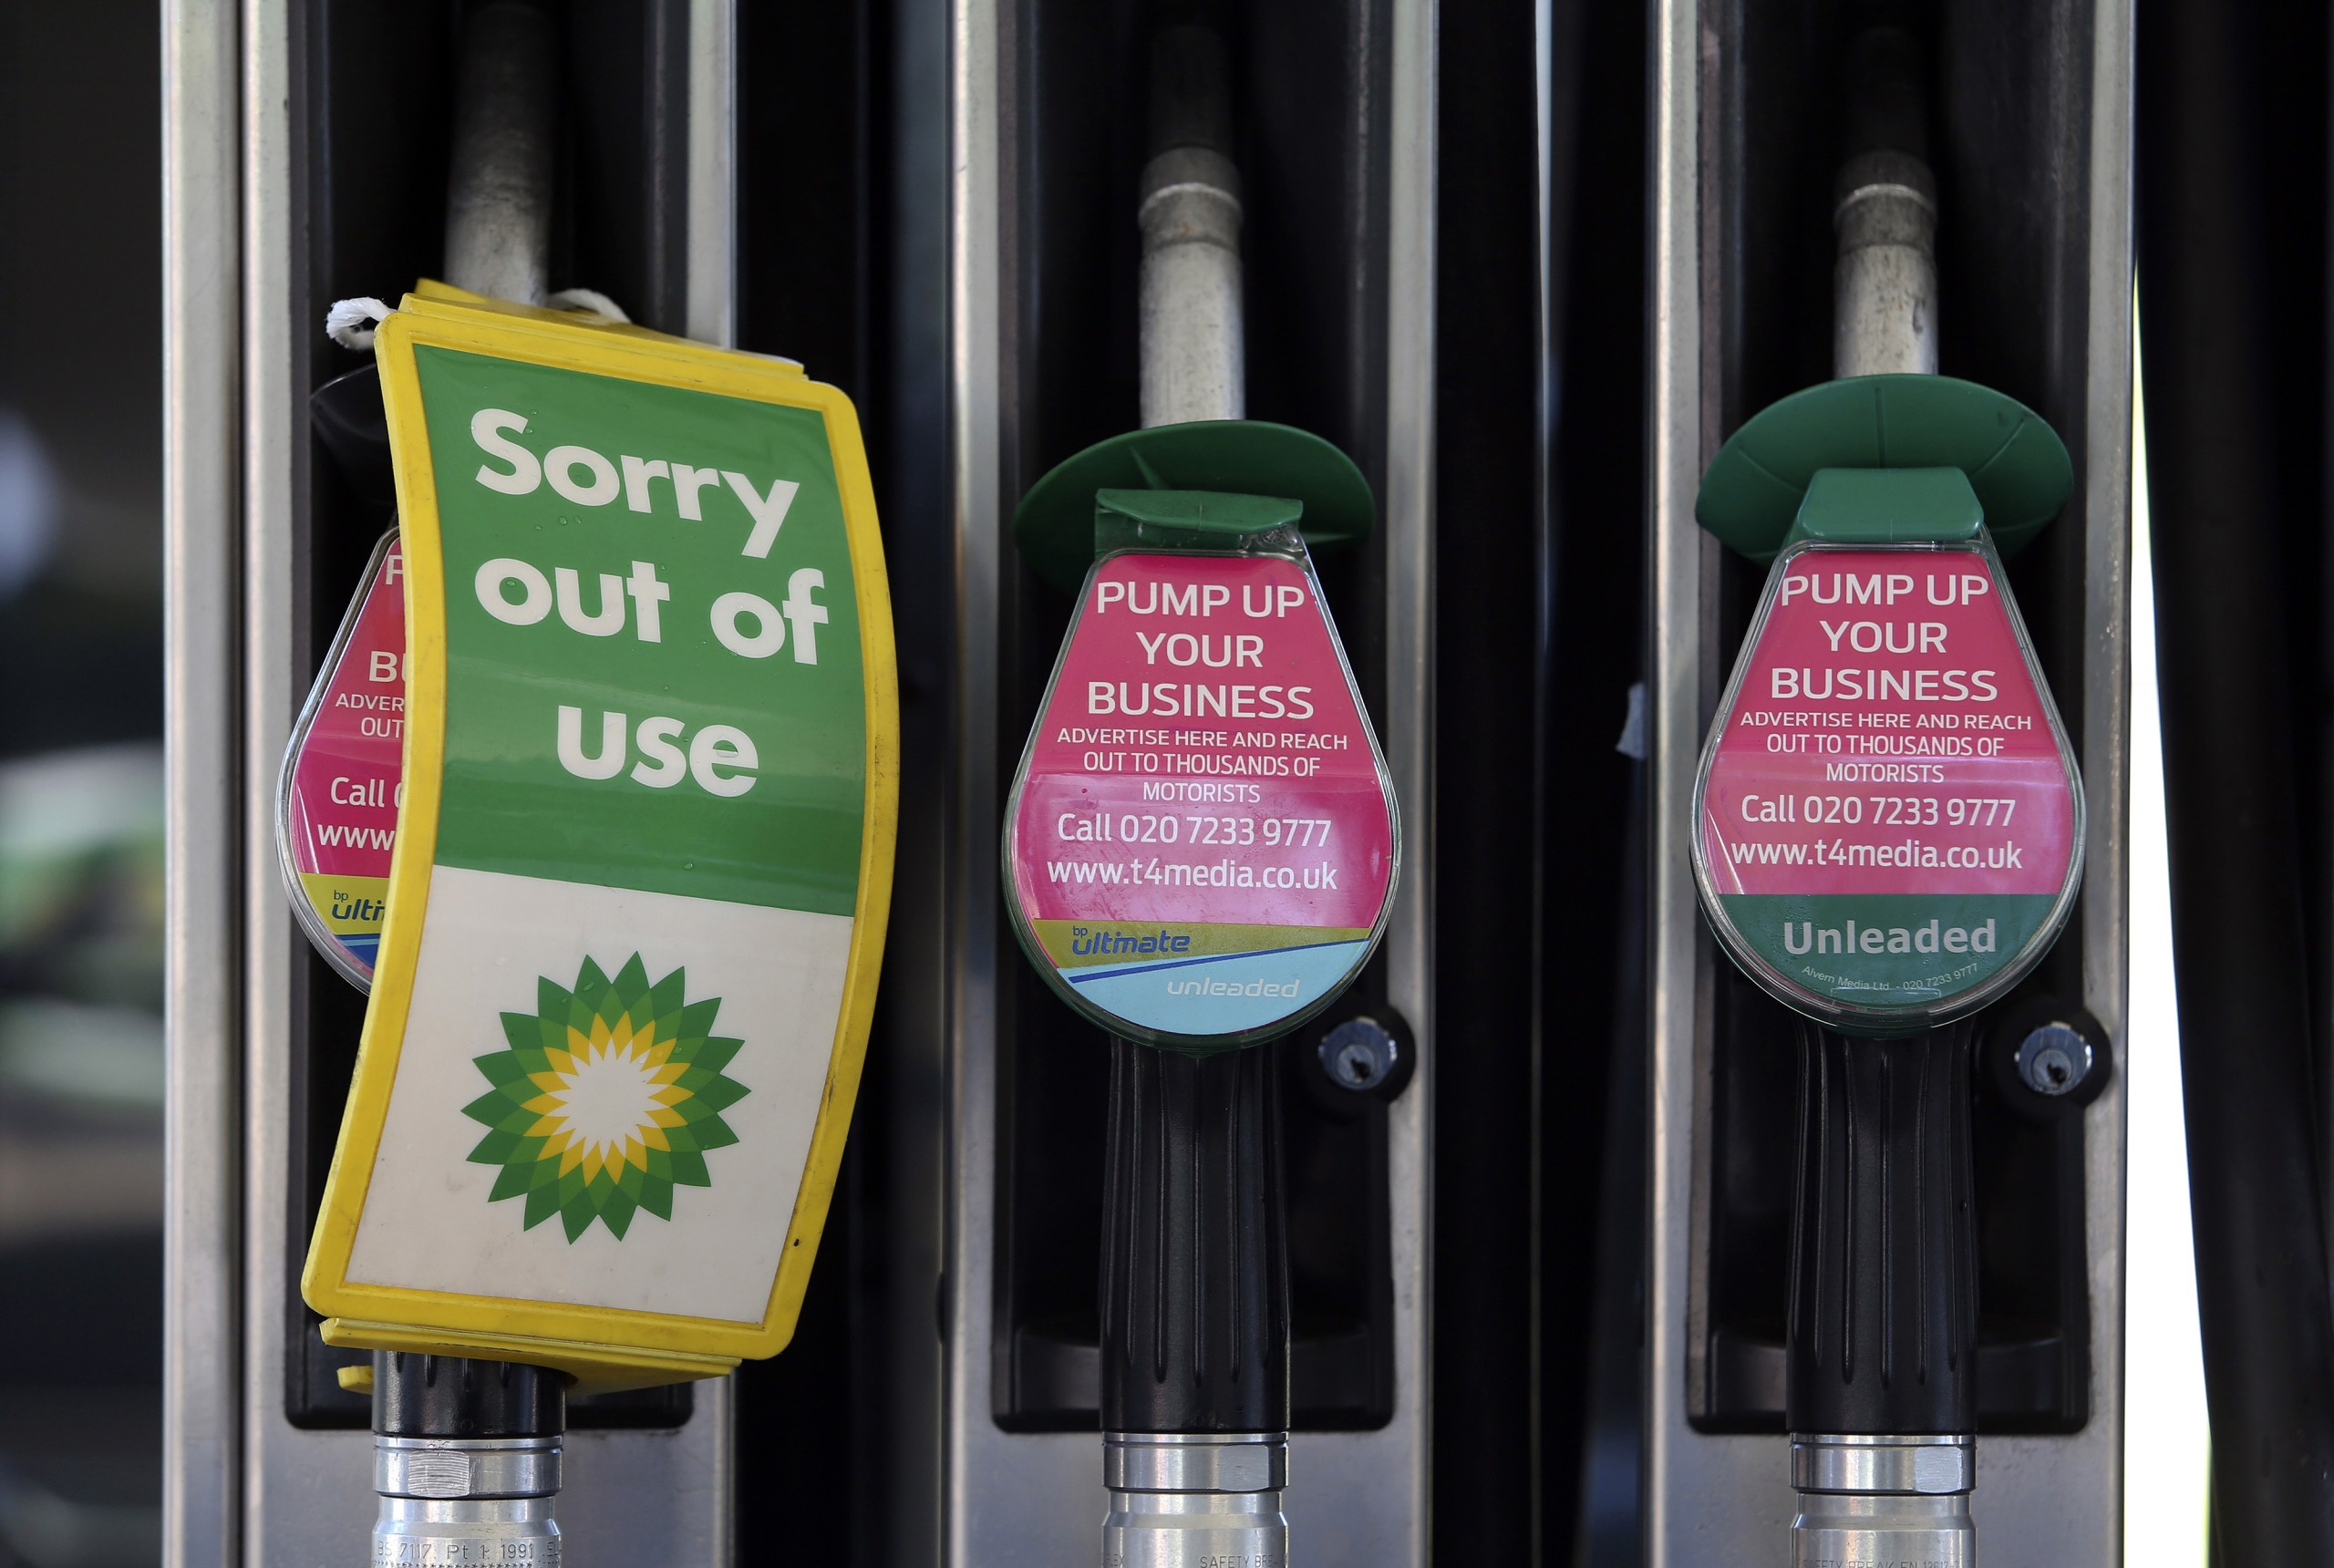 A 'Sorry, out of use' sign sits on a diesel fuel pump at a gas station operated by BP Plc in London, U.K., on Tuesday, June 4, 2013. Royal Dutch Shell Plc, BP Plc, Statoil ASA and Platts, the oil-price data collector owned by McGraw Hill Financial Inc., said they're being investigated after the European Commission conducted raids in three countries to ferret out evidence of collusion. Photographer: Chris Ratcliffe/Bloomberg